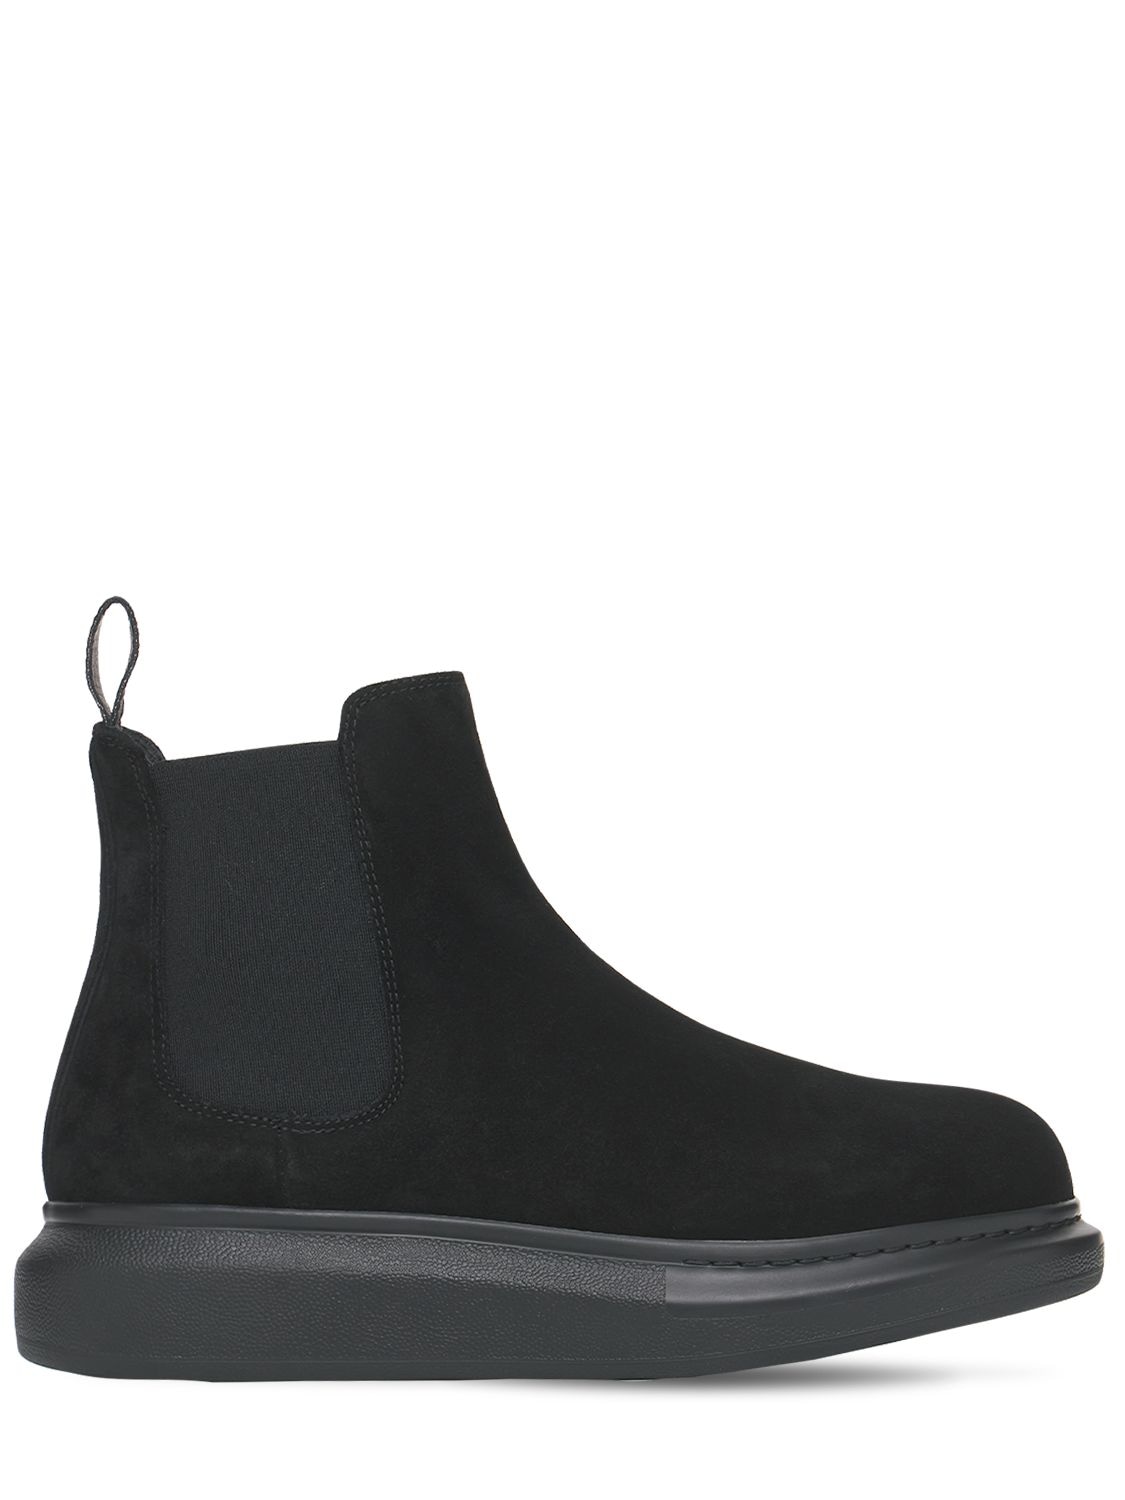 45mm Hybrid Suede Slip-on Boots